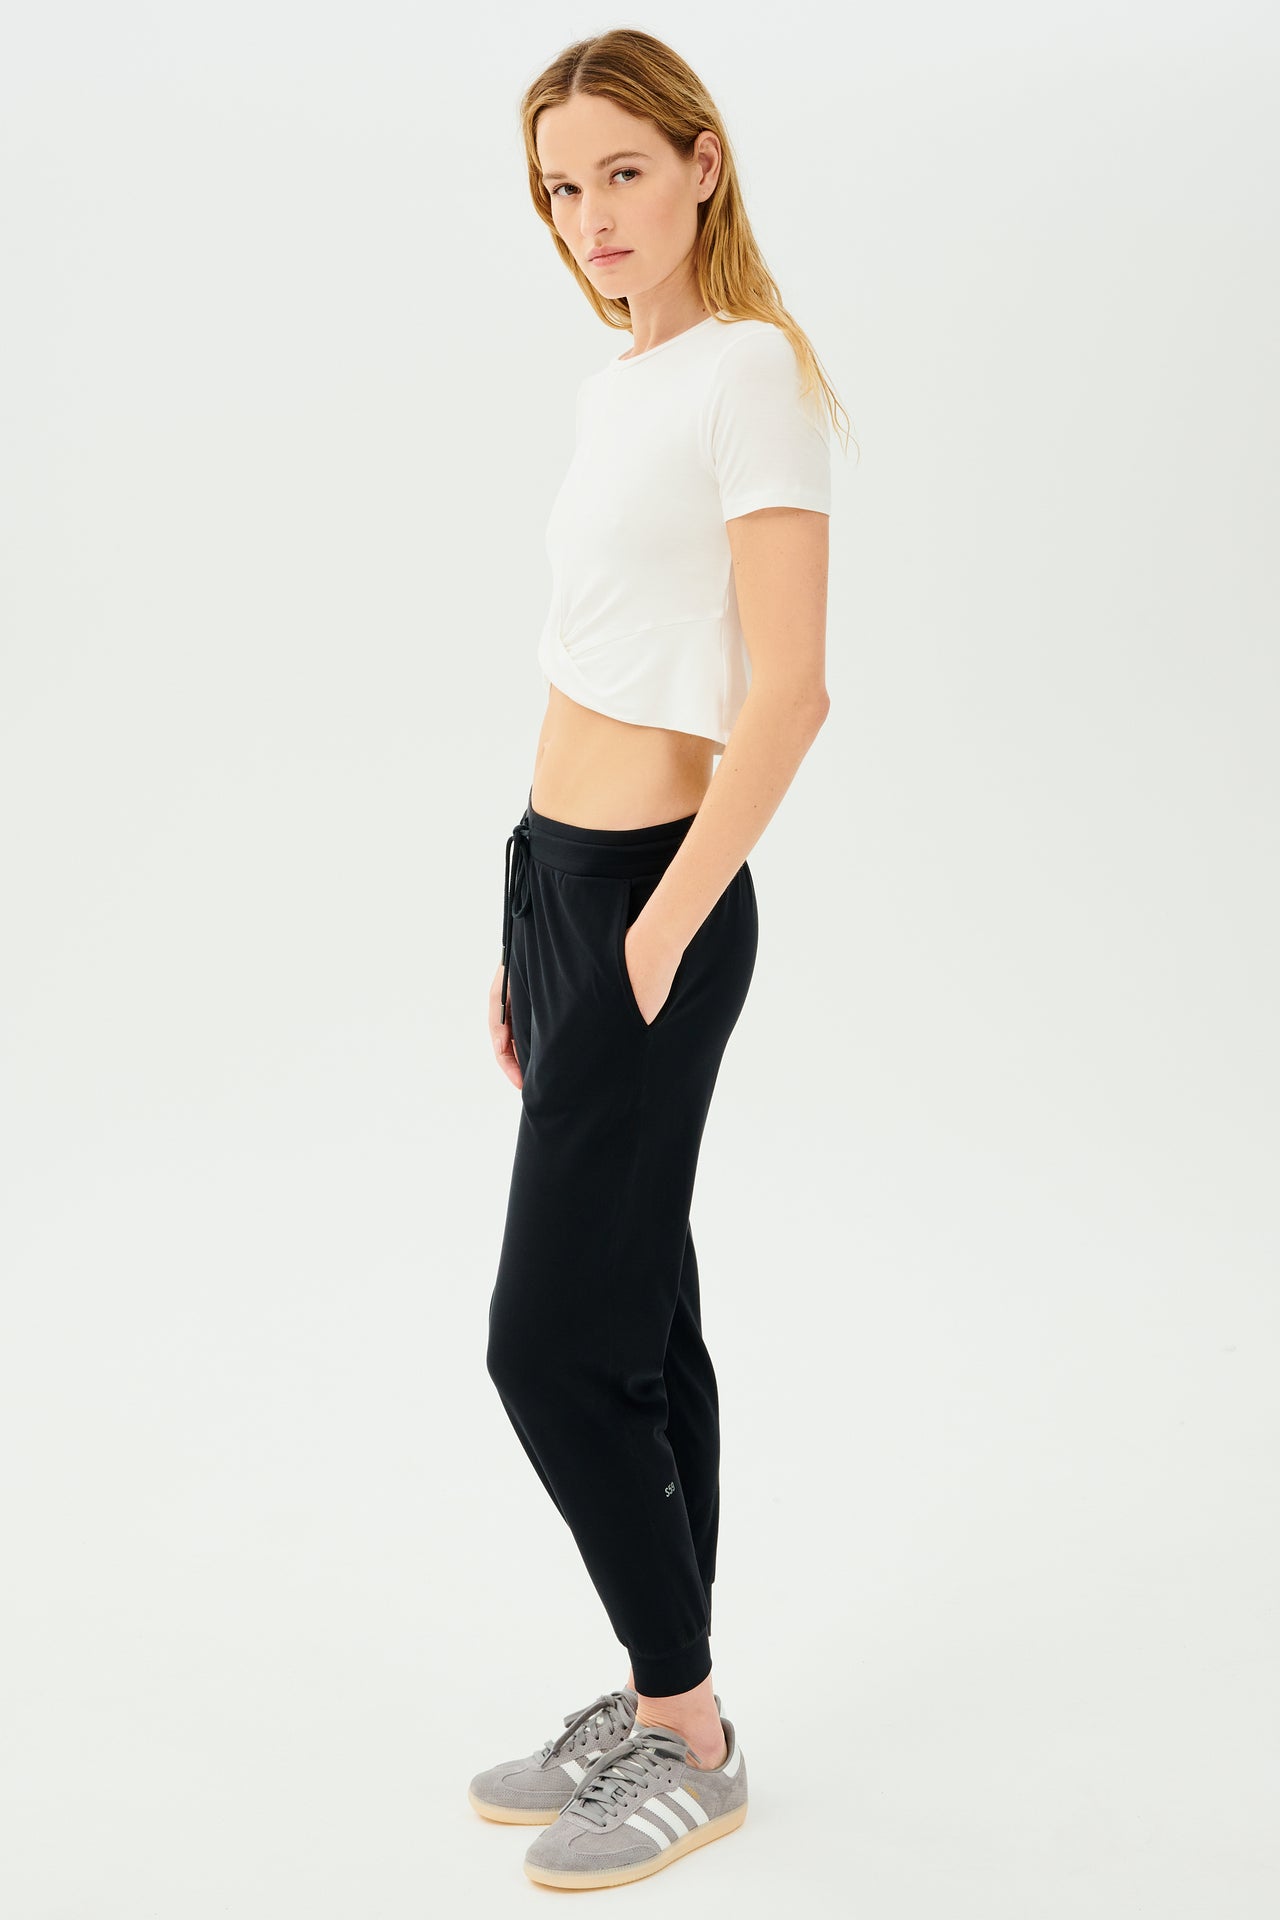 A woman wearing a flirty Daisy Jersey Tee in white from SPLITS59 and black high waist leggings.